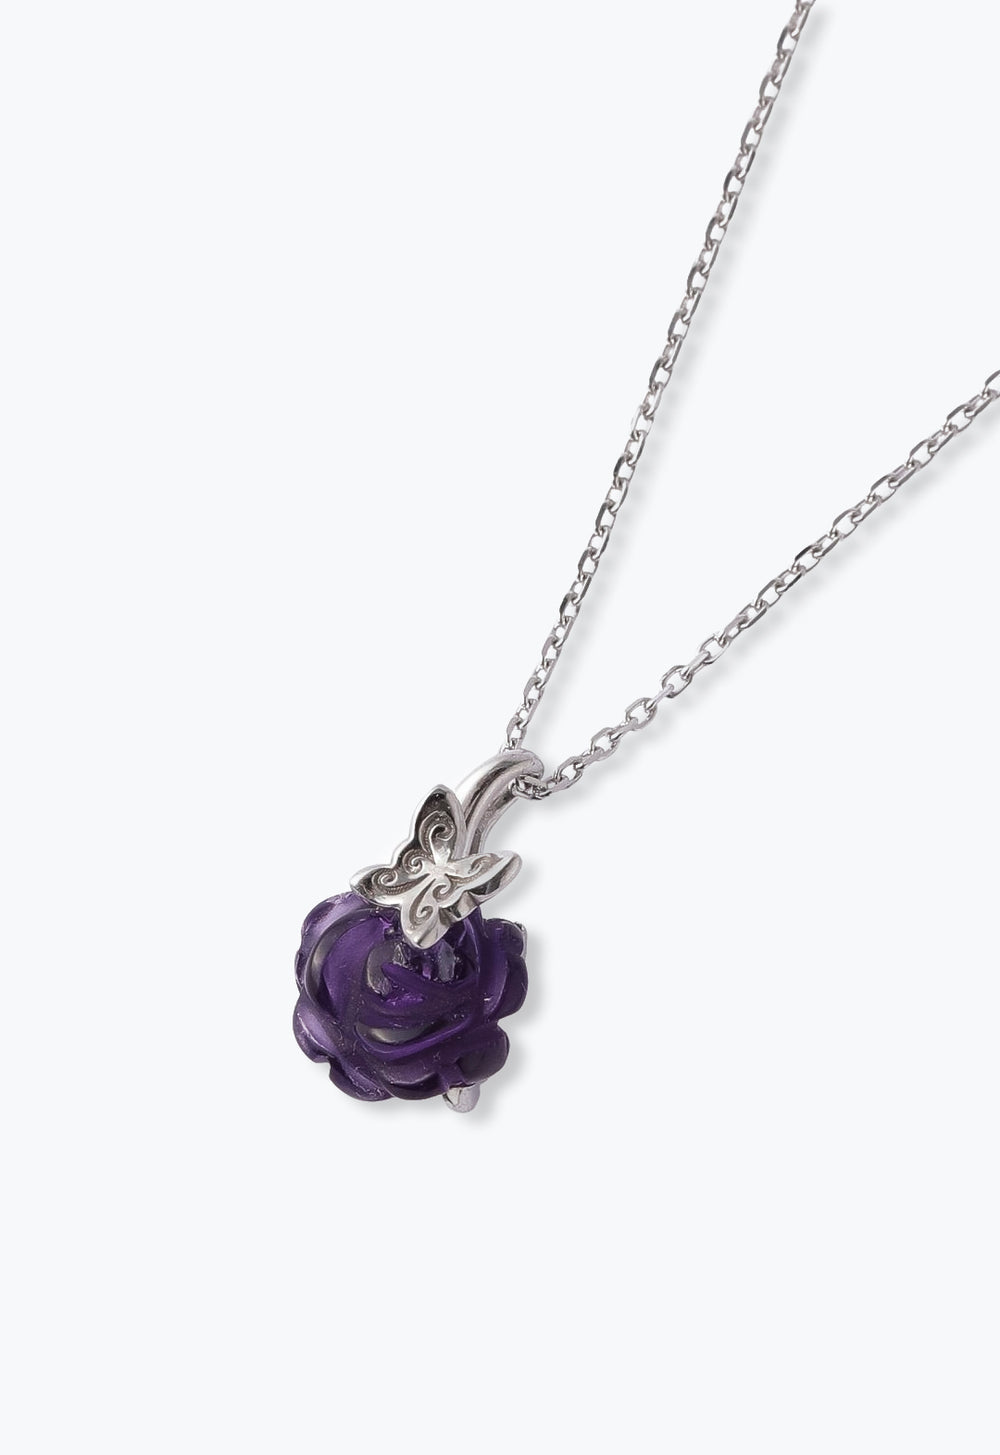 Rose and Butterfly Necklace, the butterfly is stylized, the amethyst rose is more vivid